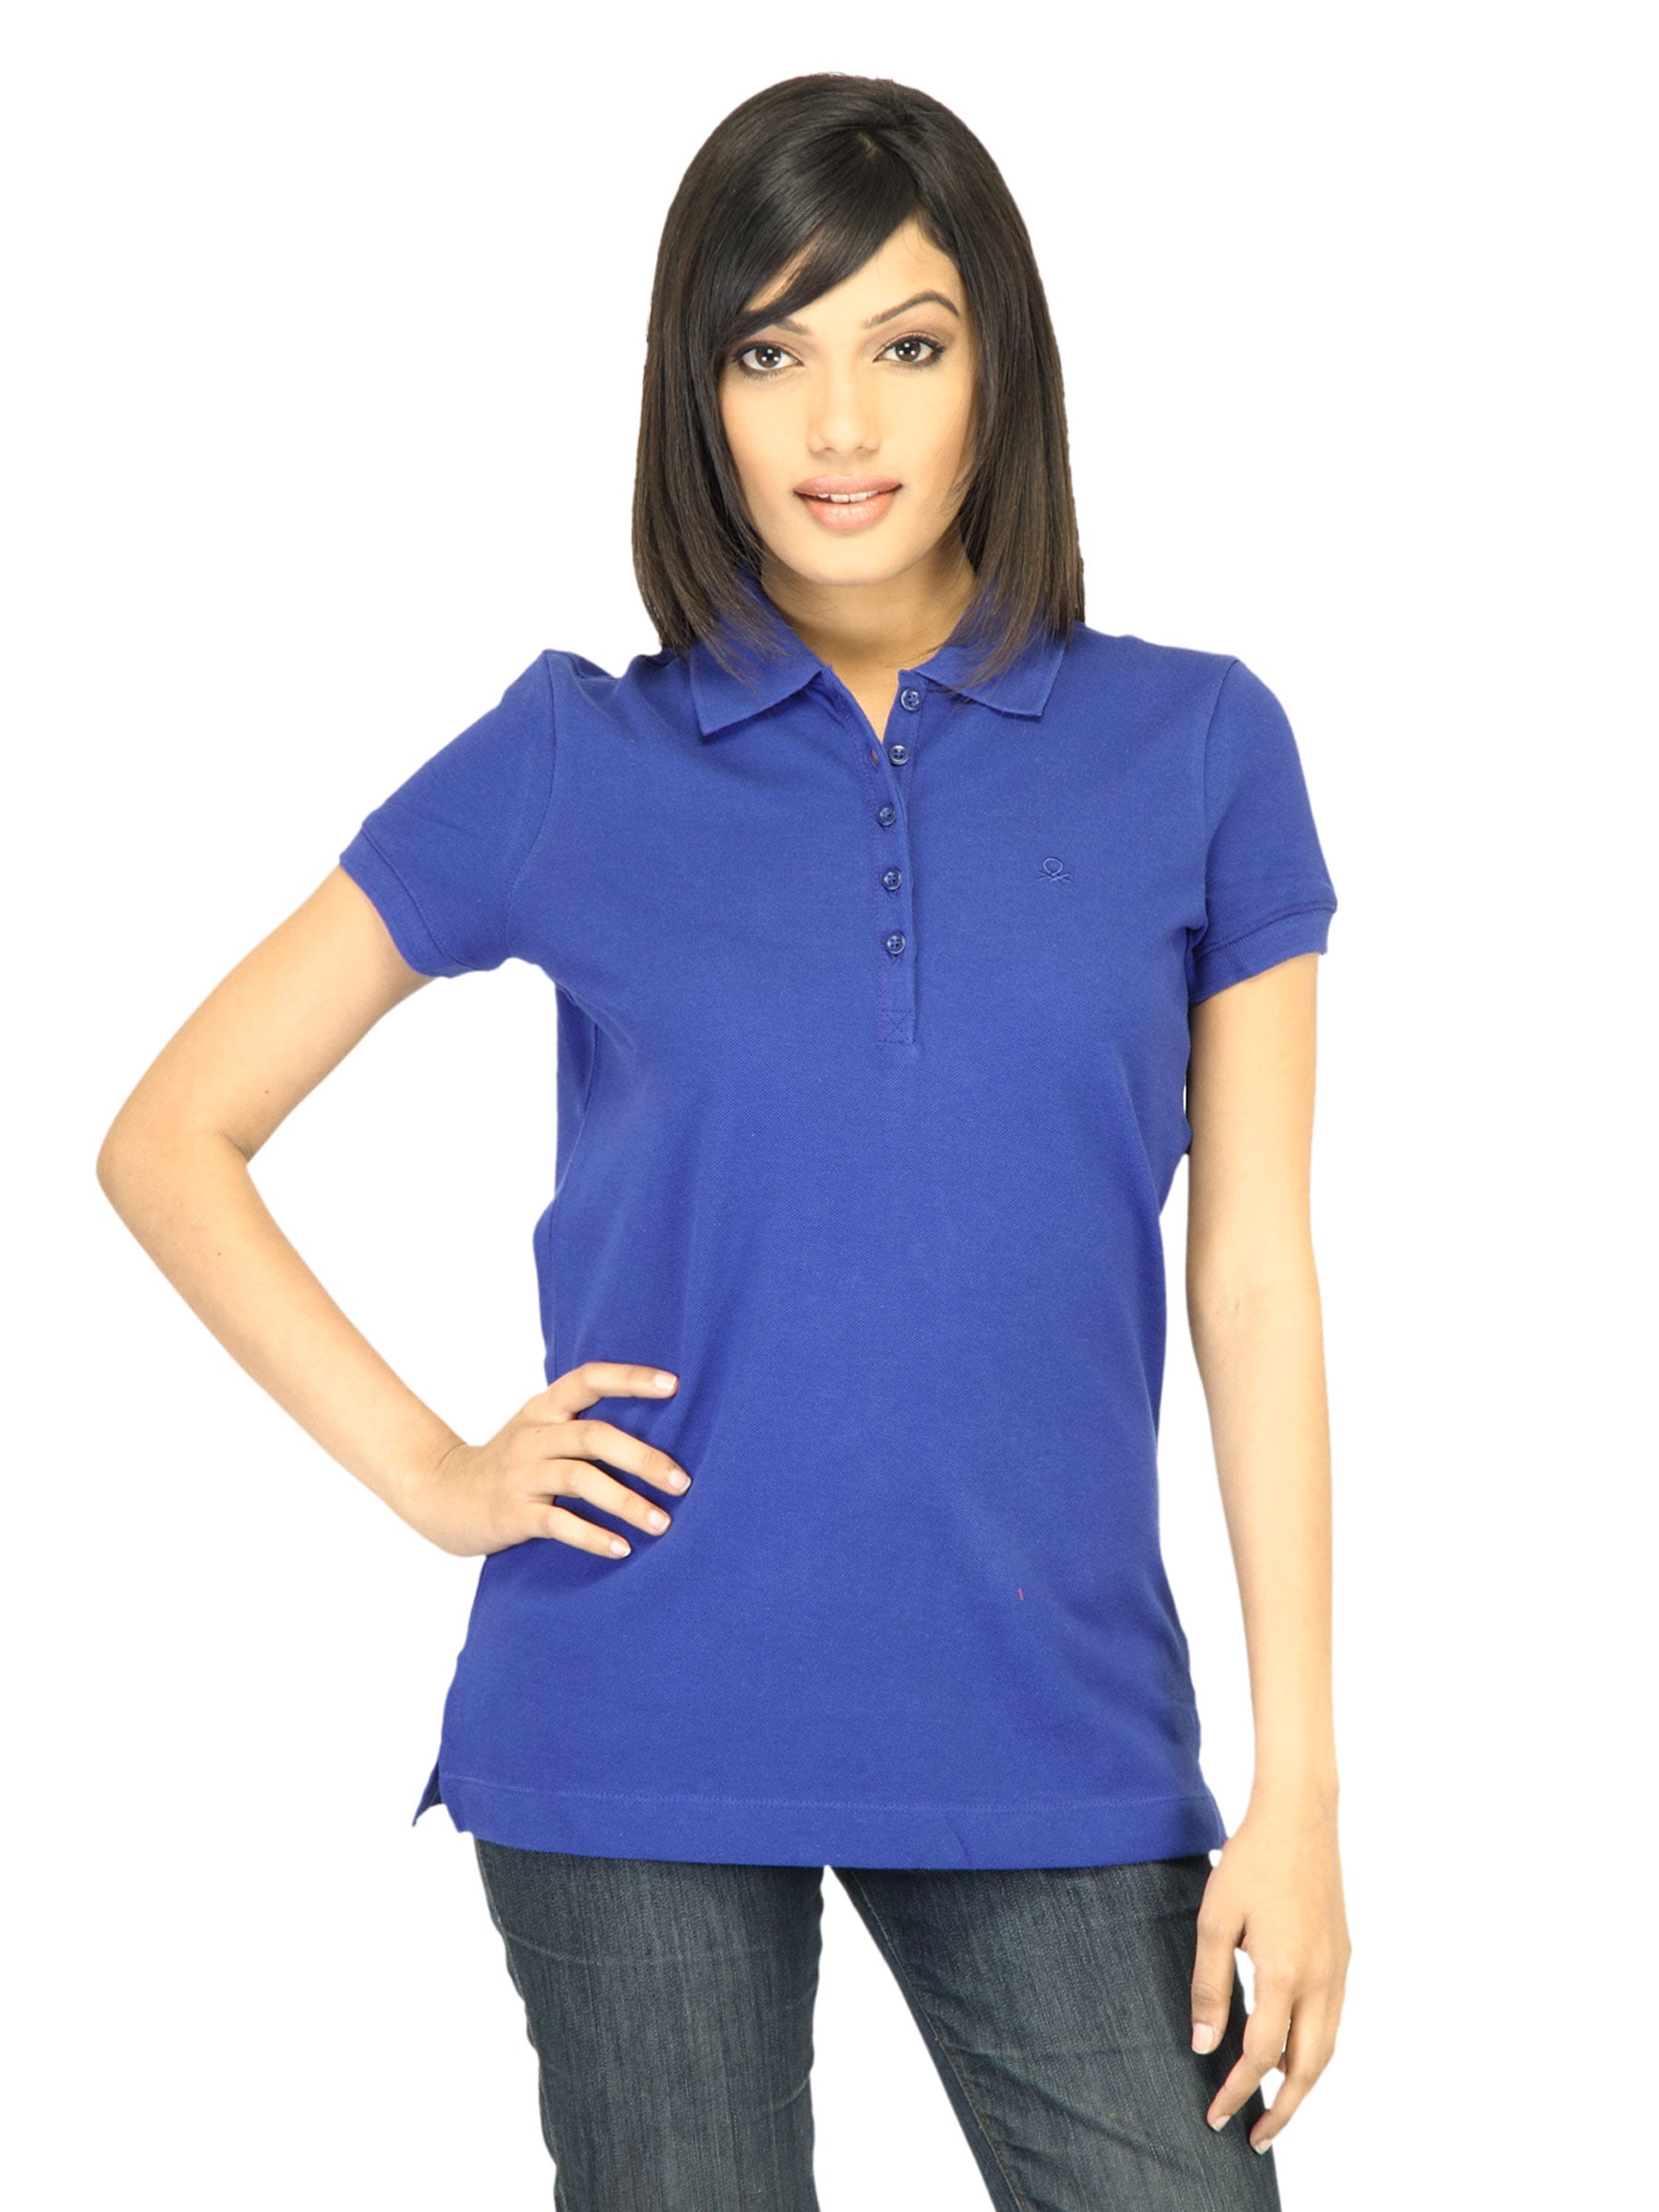 United Colors of Benetton Women Solid Blue Polo Tshirt